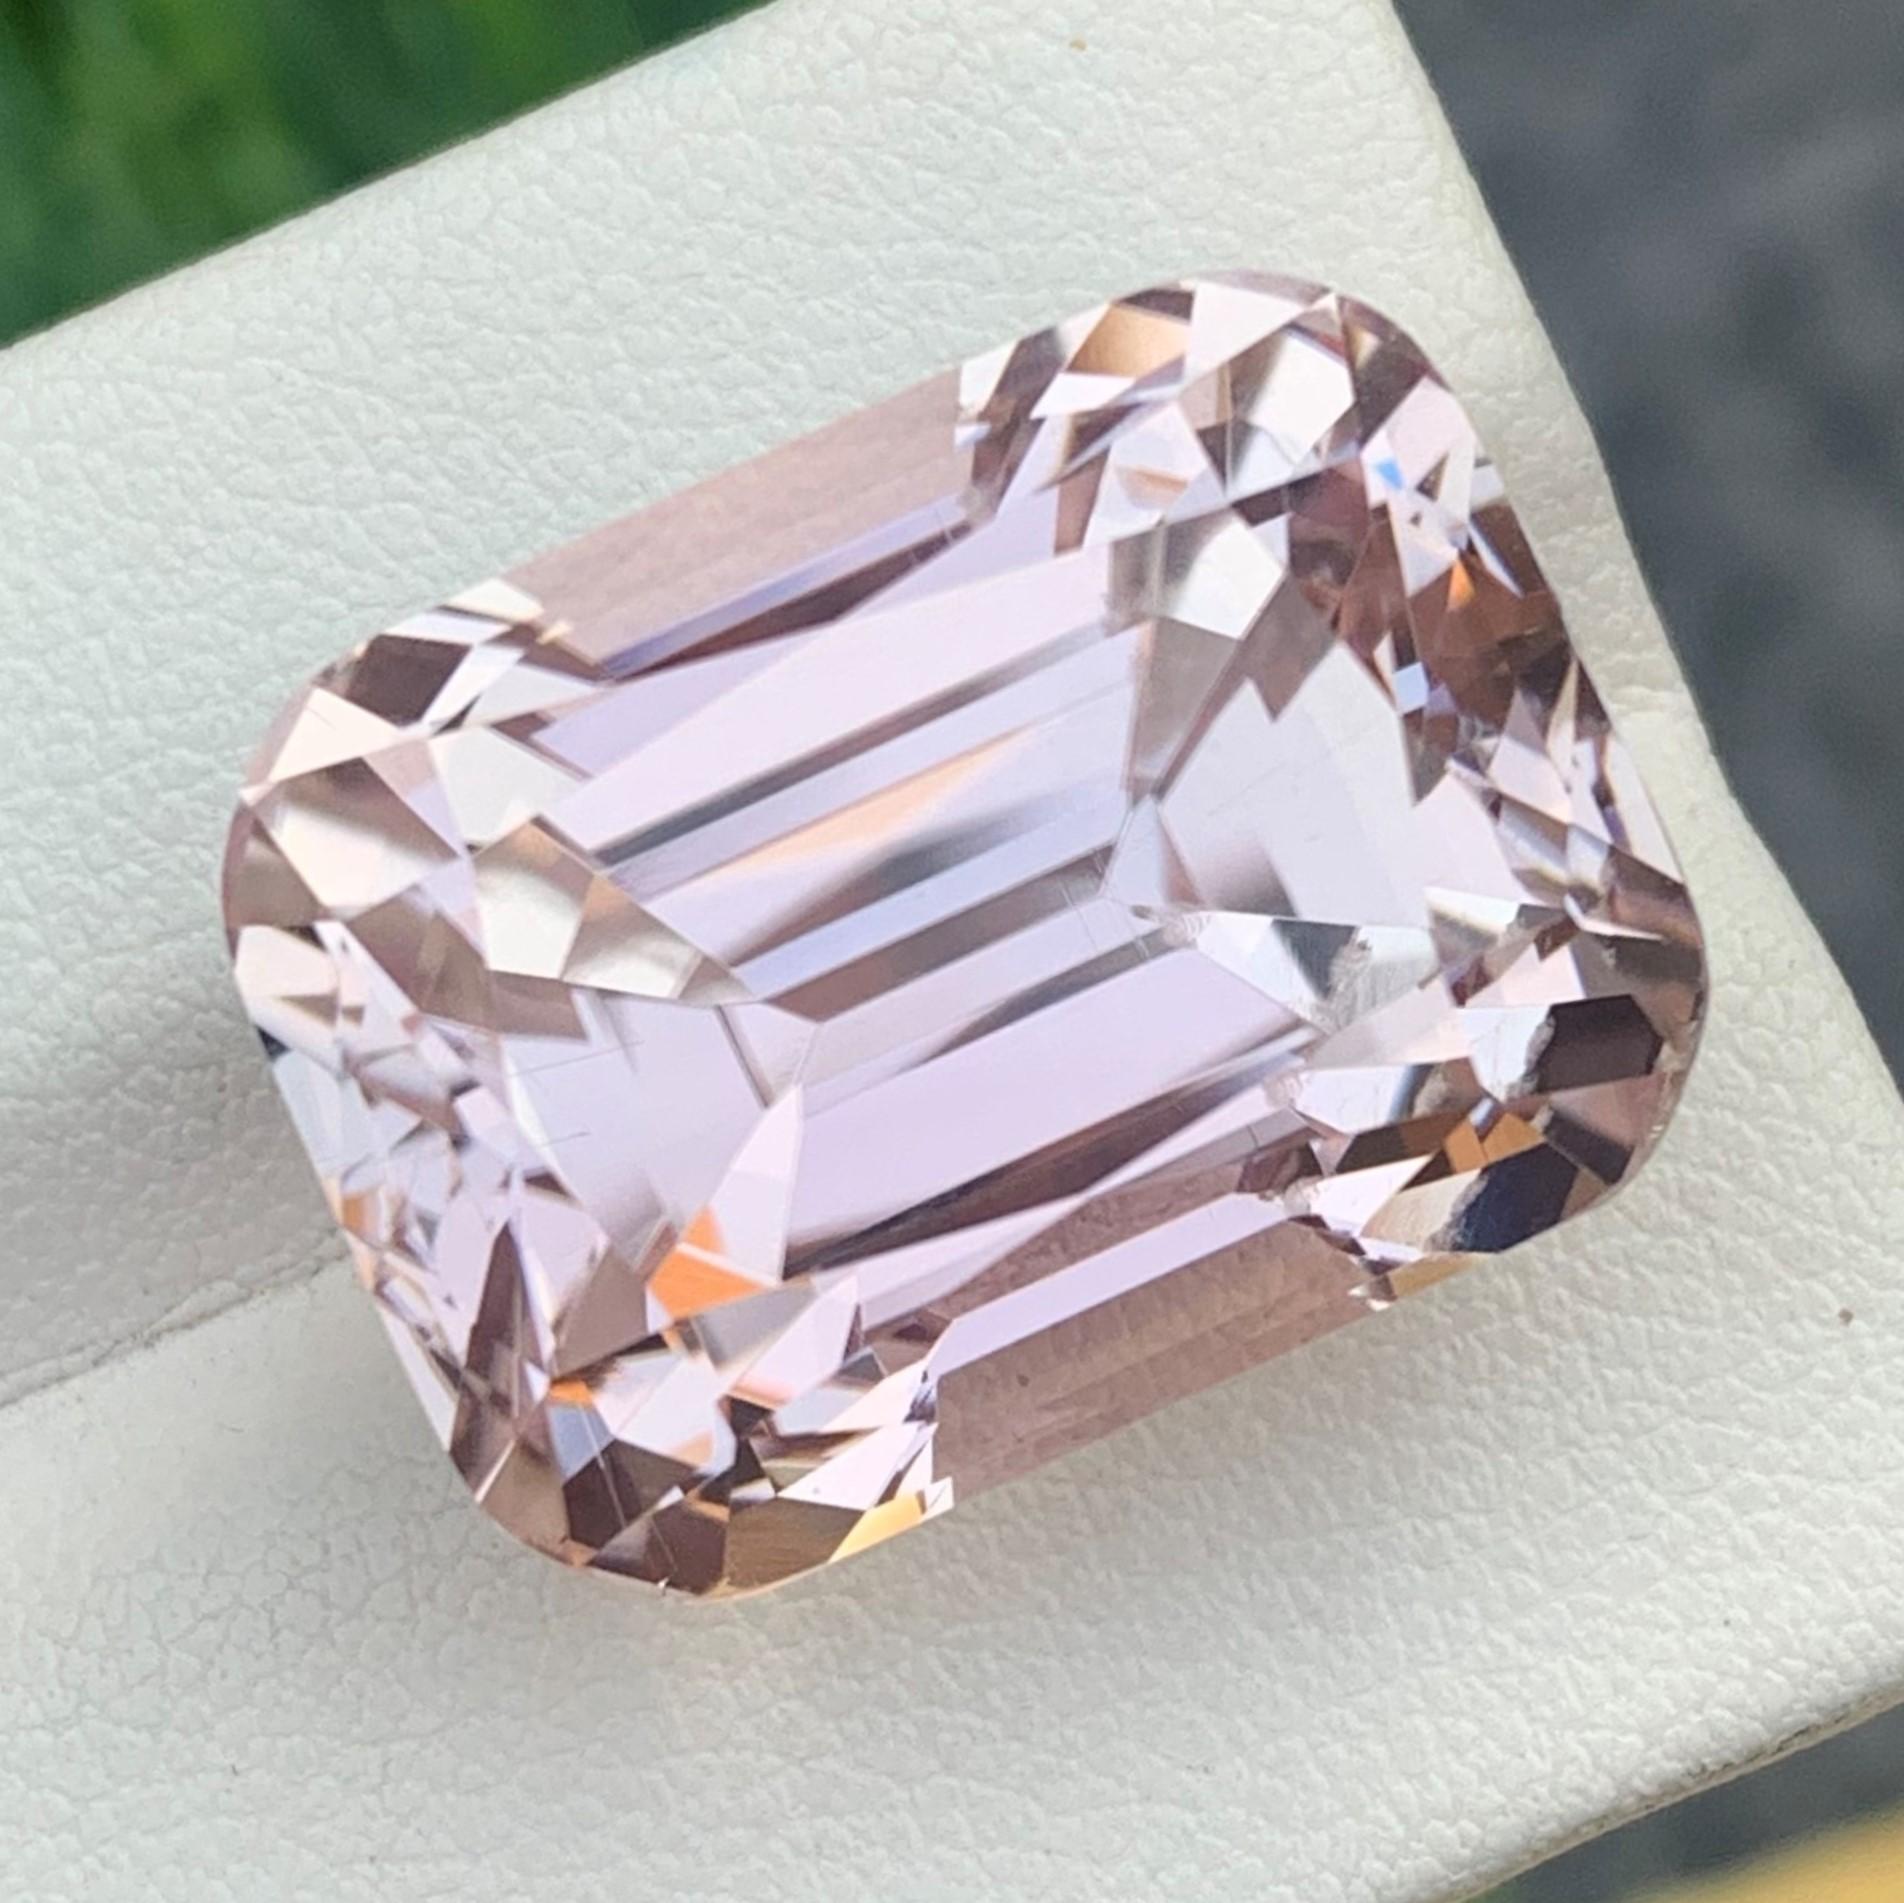 Gemstone Type : Loose Kunzite
Weight : 44.35 Carats
Dimensions : 21x15.9x15.5 Mm
Origin : Afghanistan
Clarity : Eye Clean
Shape: Long Cushion Cut
Color: Soft Light Pink
Certificate: On Demand
.
It is known for healing benefits often having to do